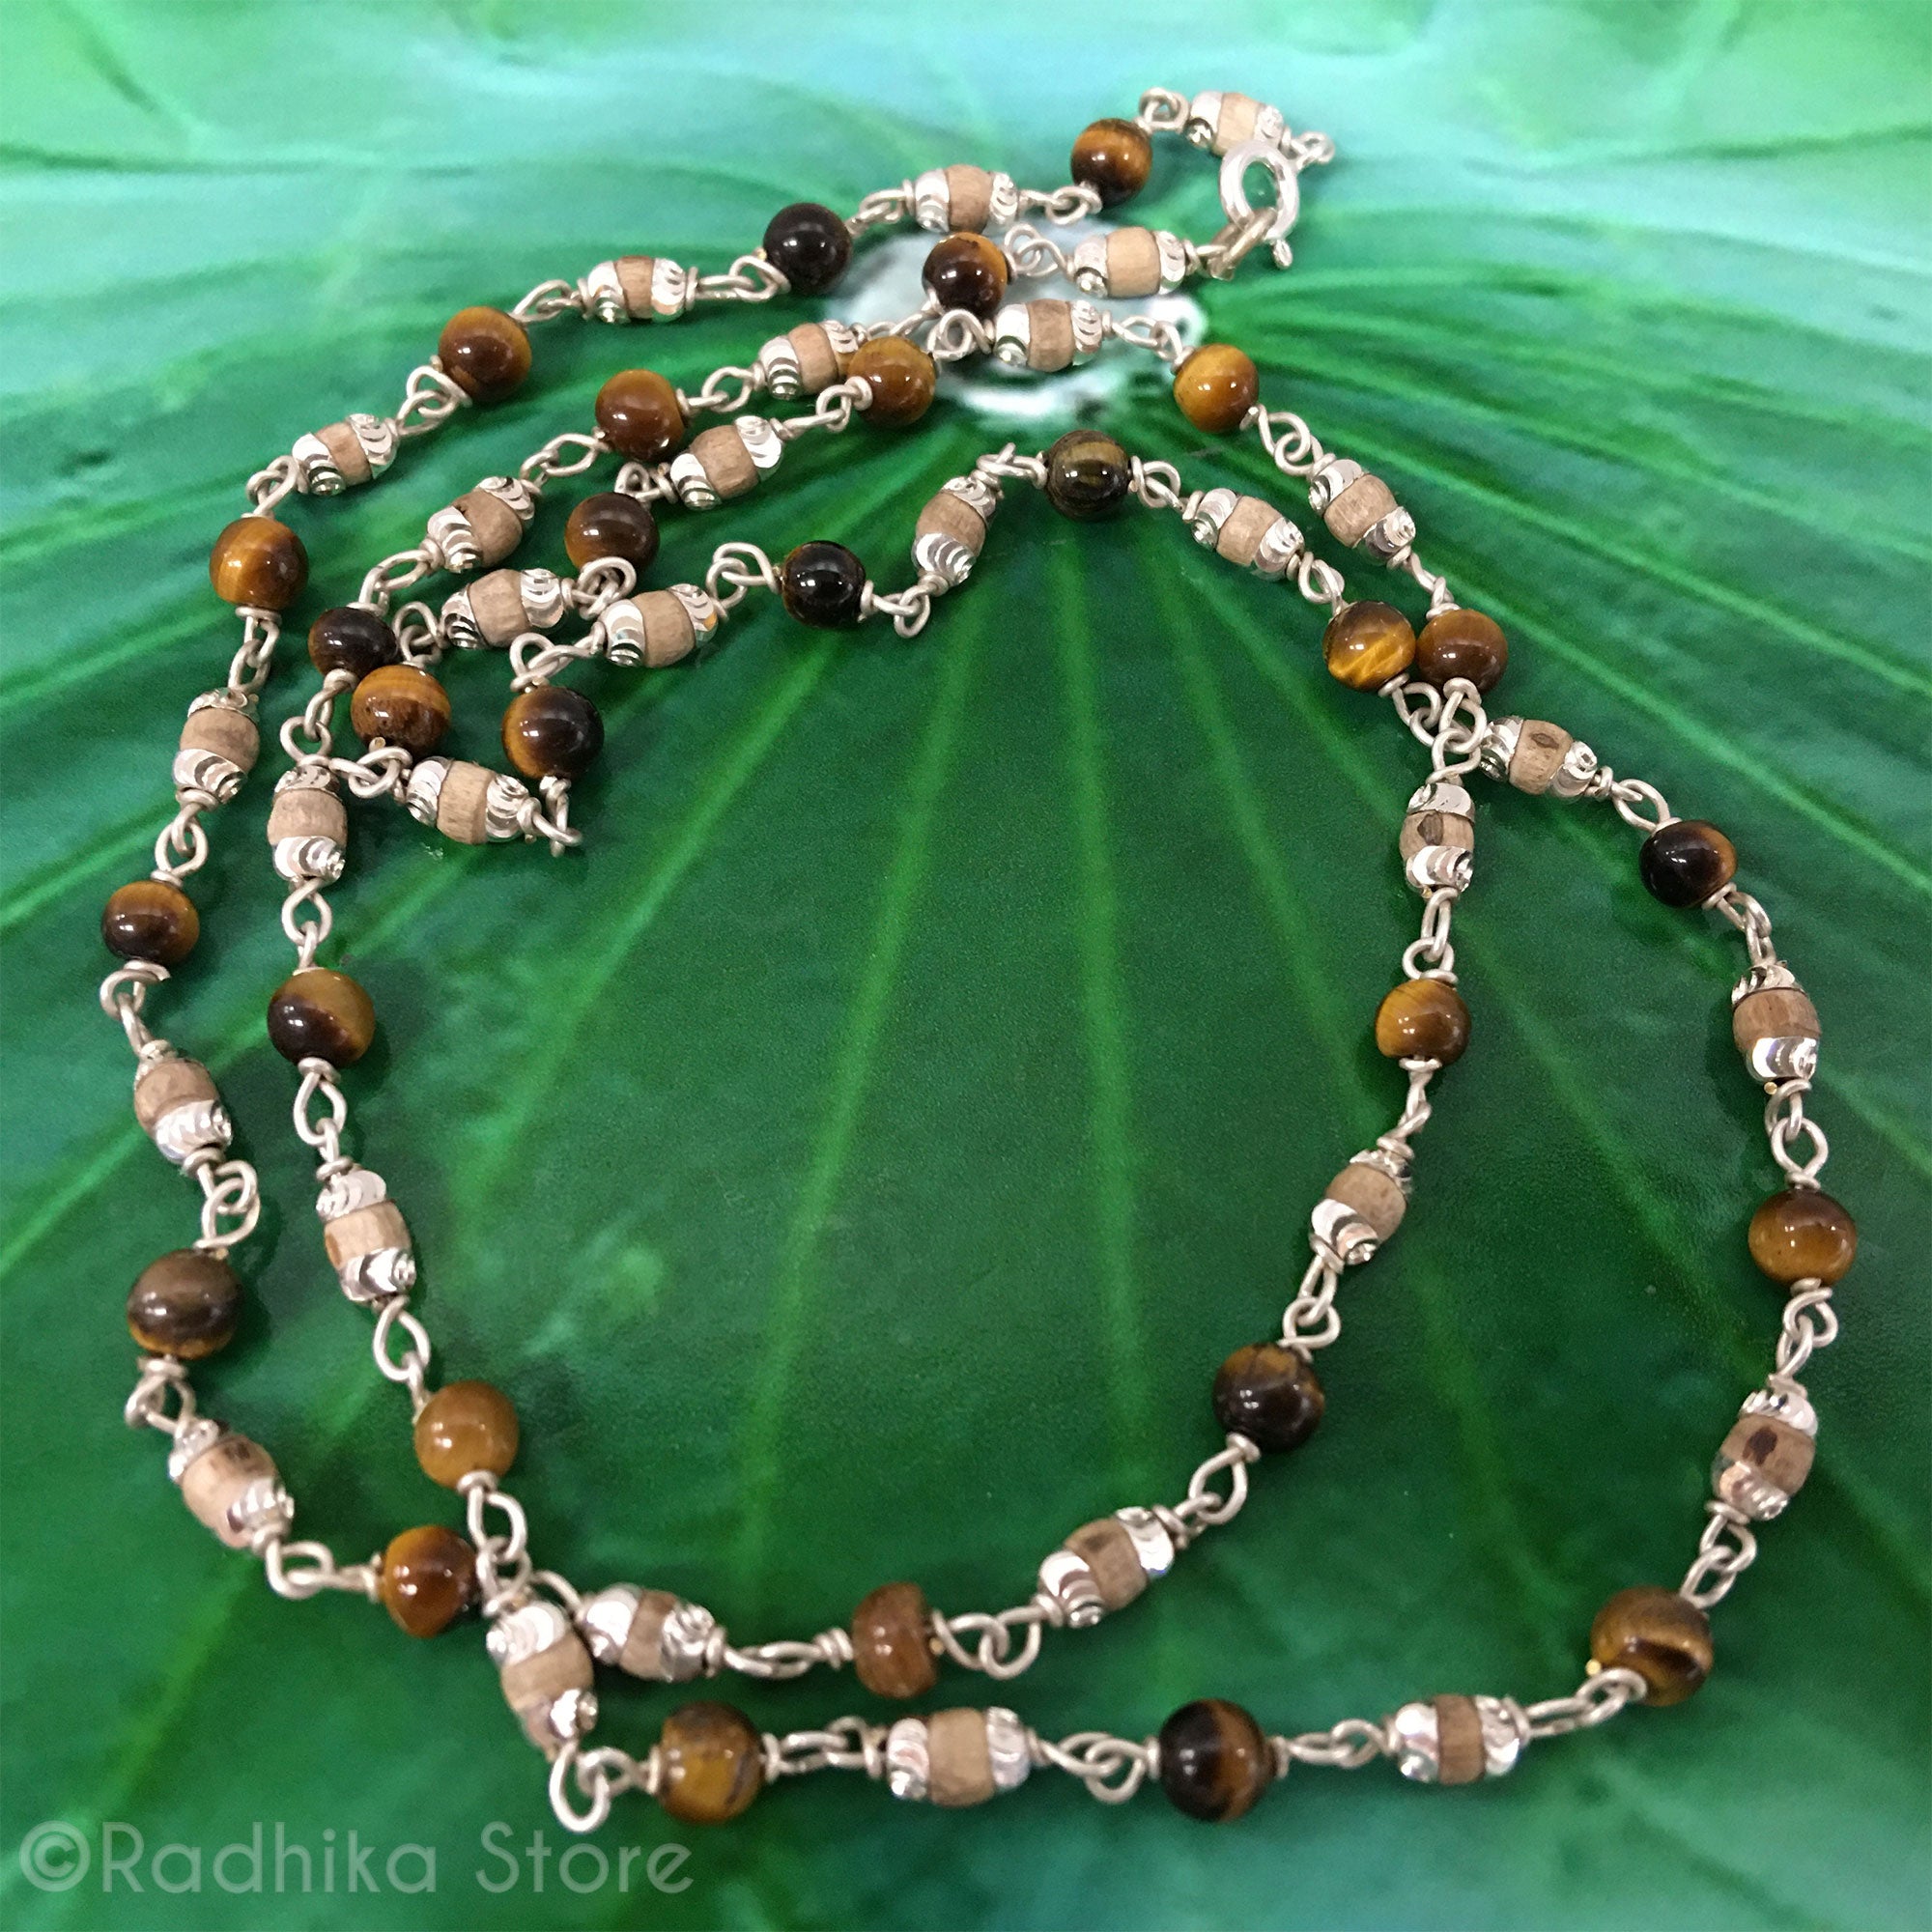 Tulsi With Tiger's Eye and Silver Chain Necklace